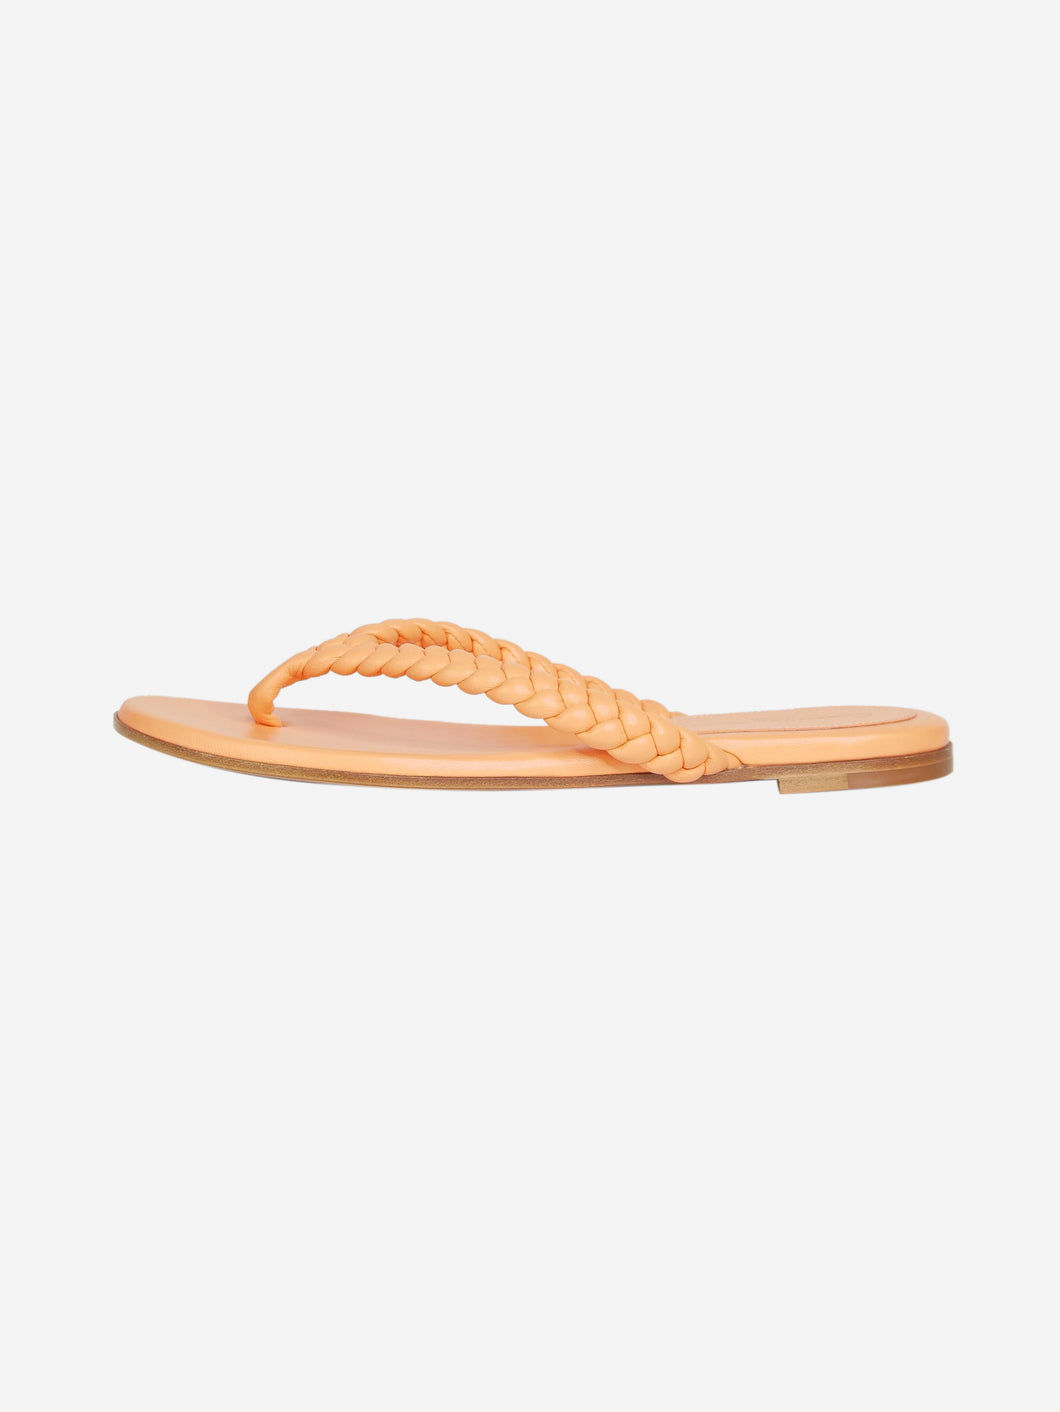 Orange leather braided thong sandals - size EU 38 Flat Sandals Gianvito Rossi 